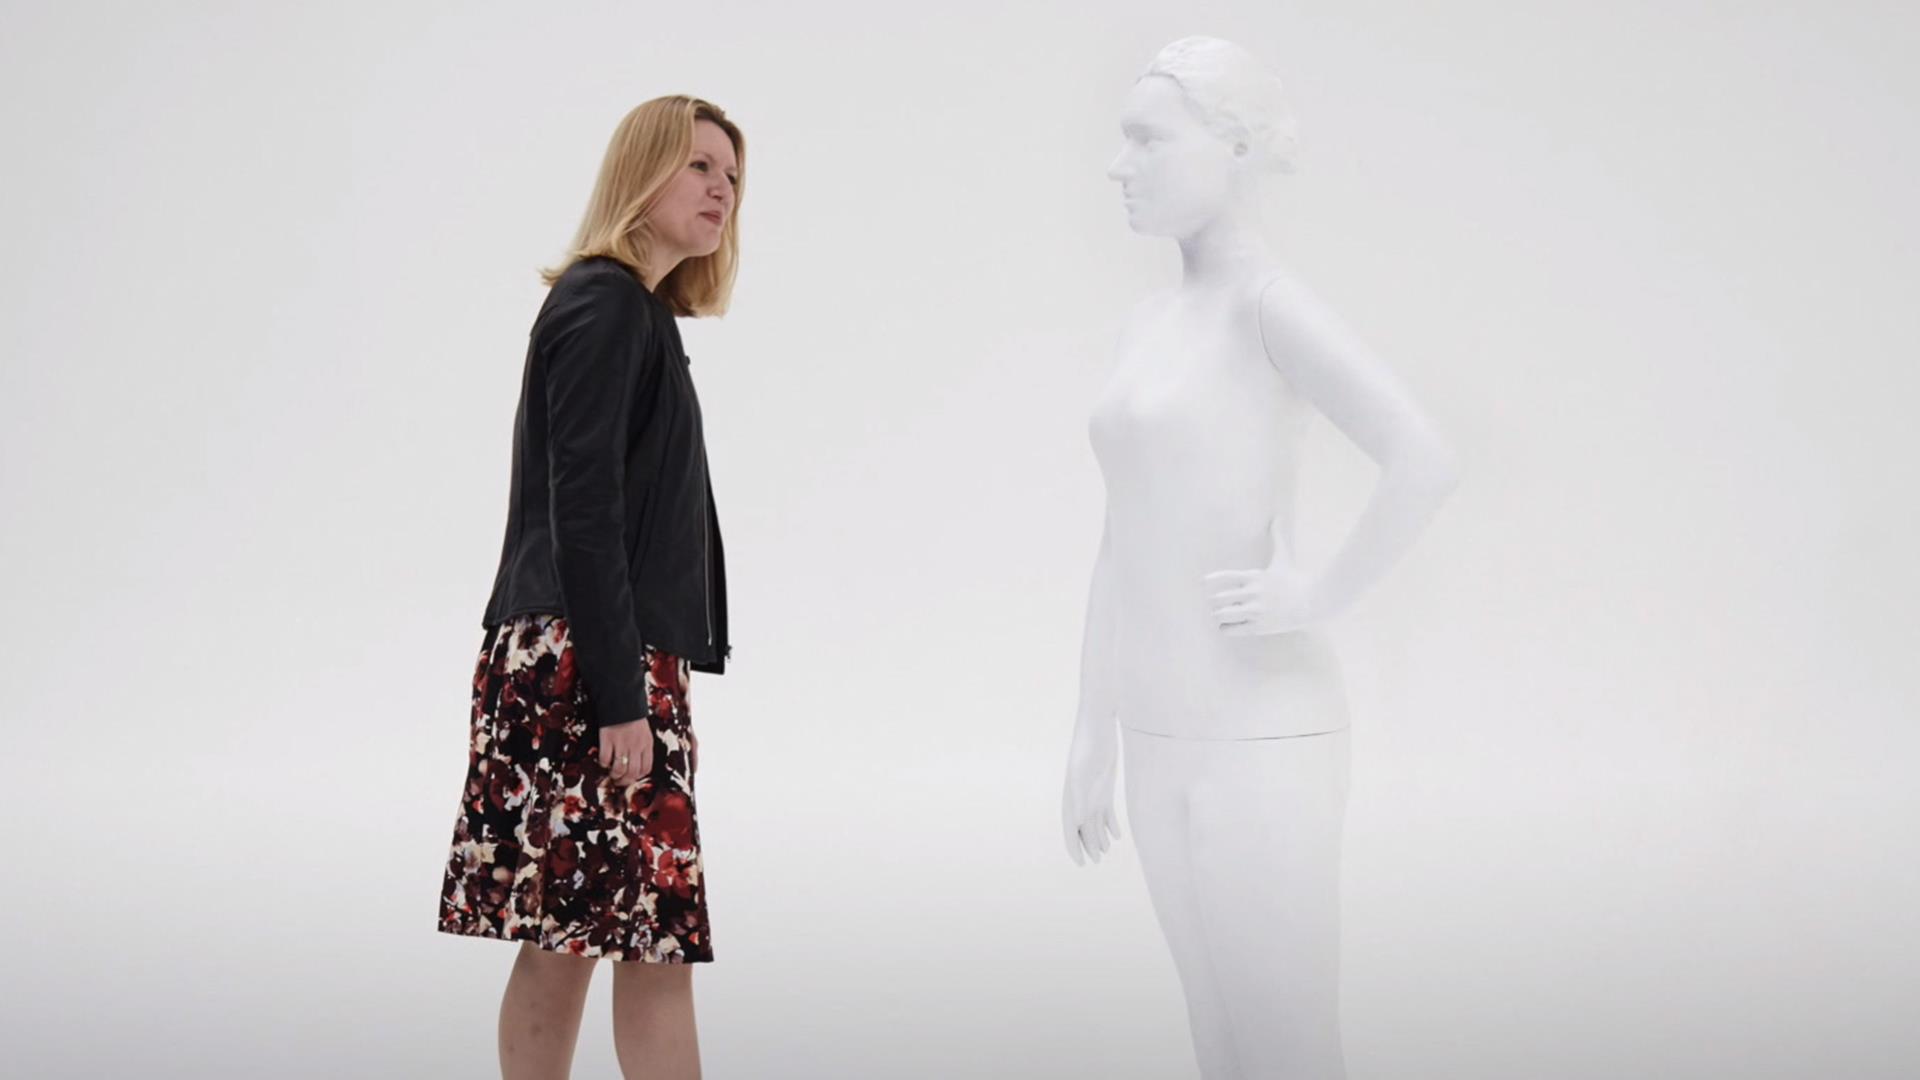 This new clothing mannequin actually looks like a real person